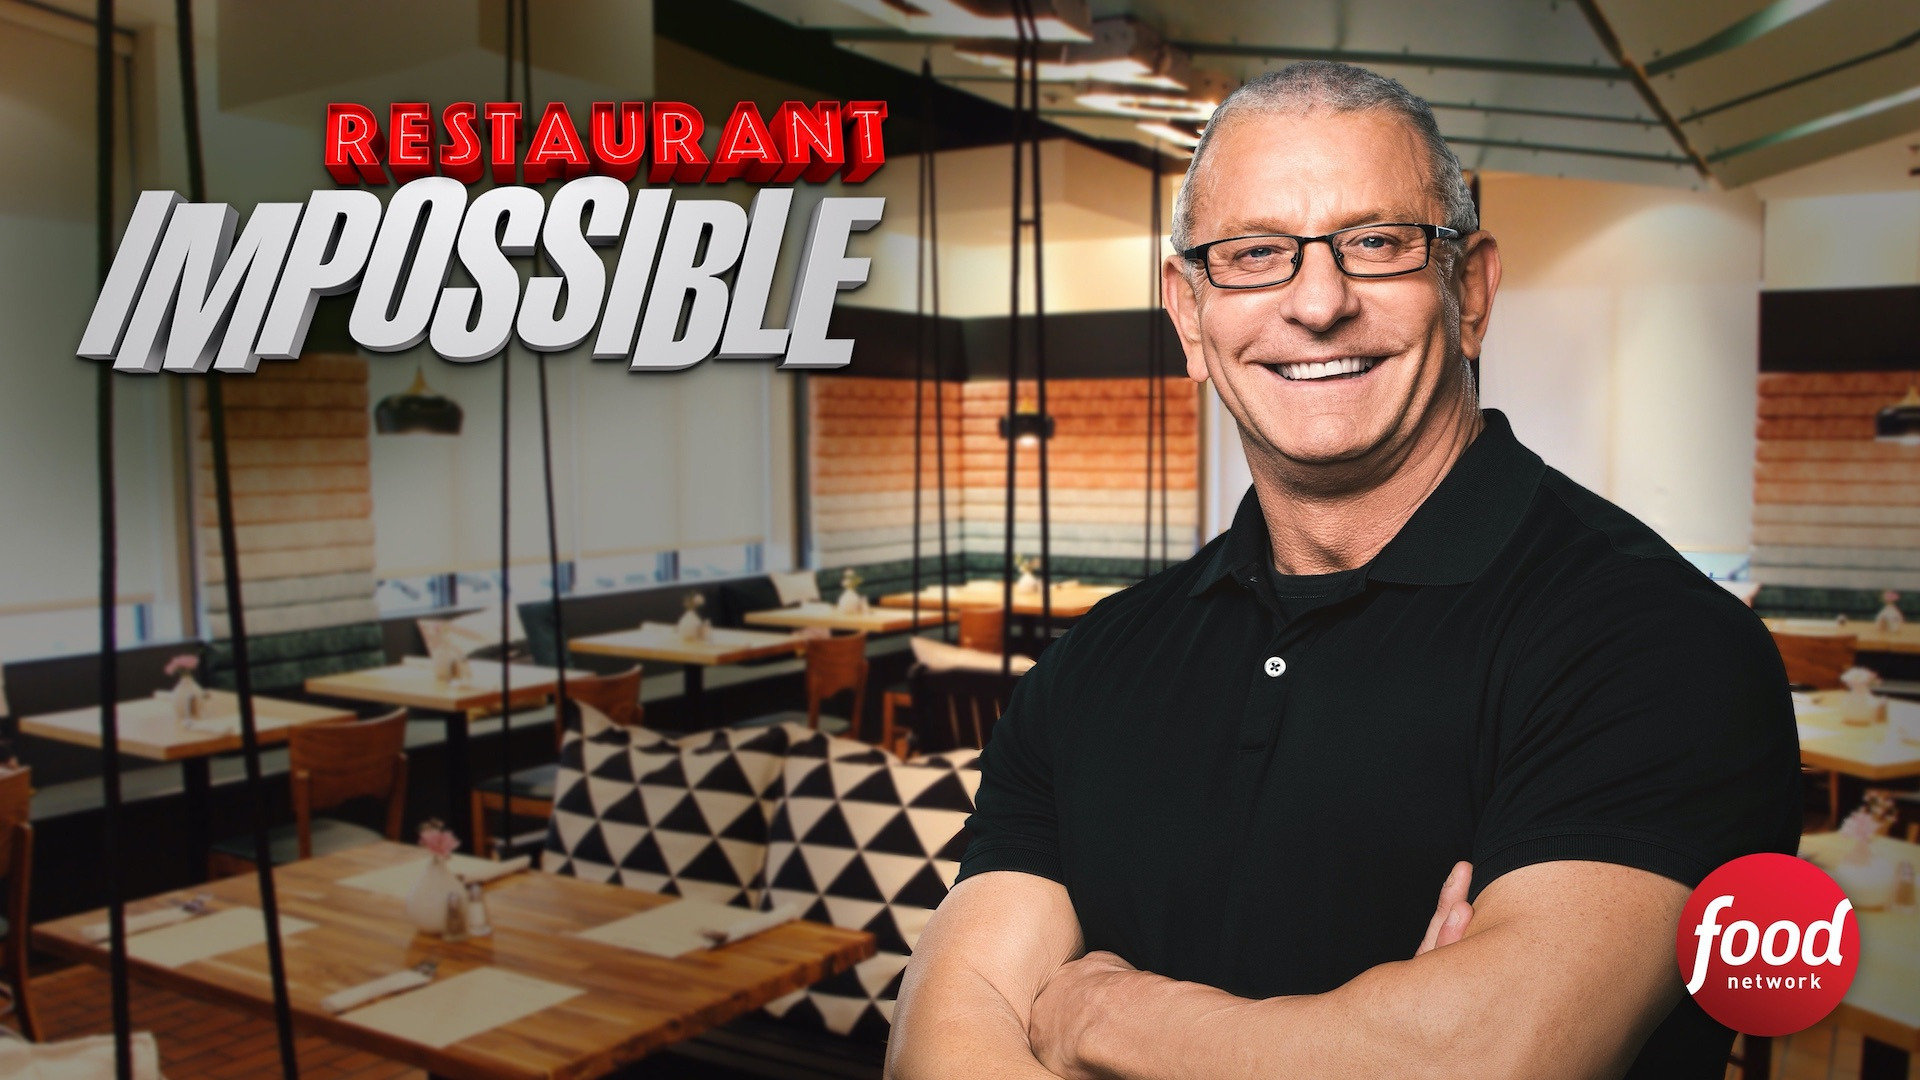 Show Restaurant: Impossible